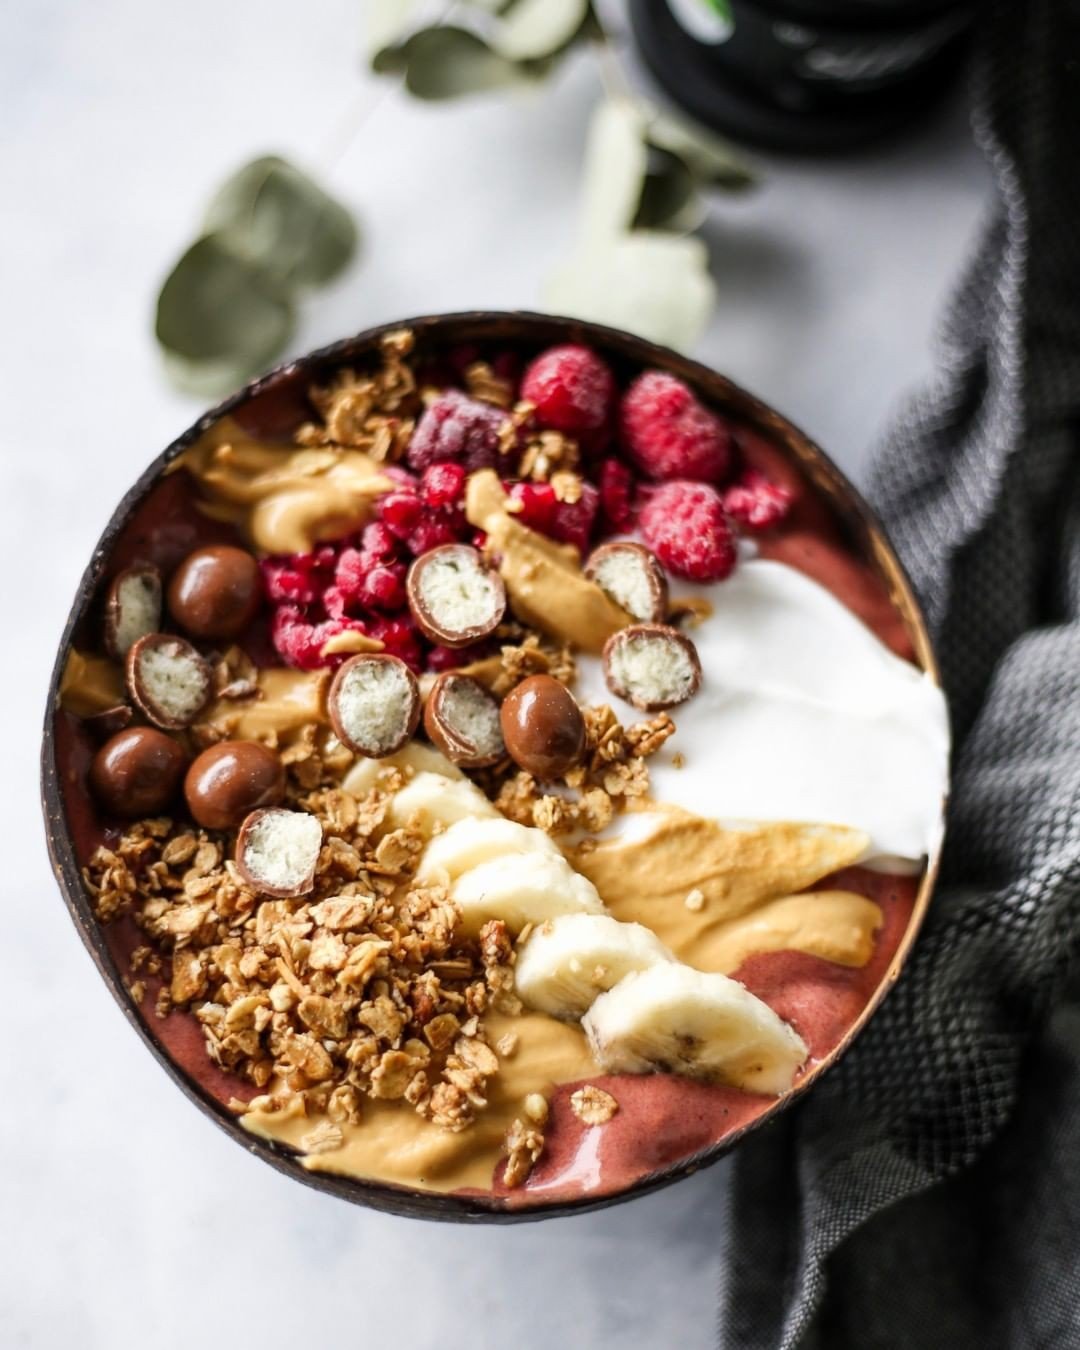 Bite Society’s plant-based chocolate balls – added to a muesli to create a decadent dessert – are among the products using plant-based milk, which is tipped to enjoy huge growth in future.